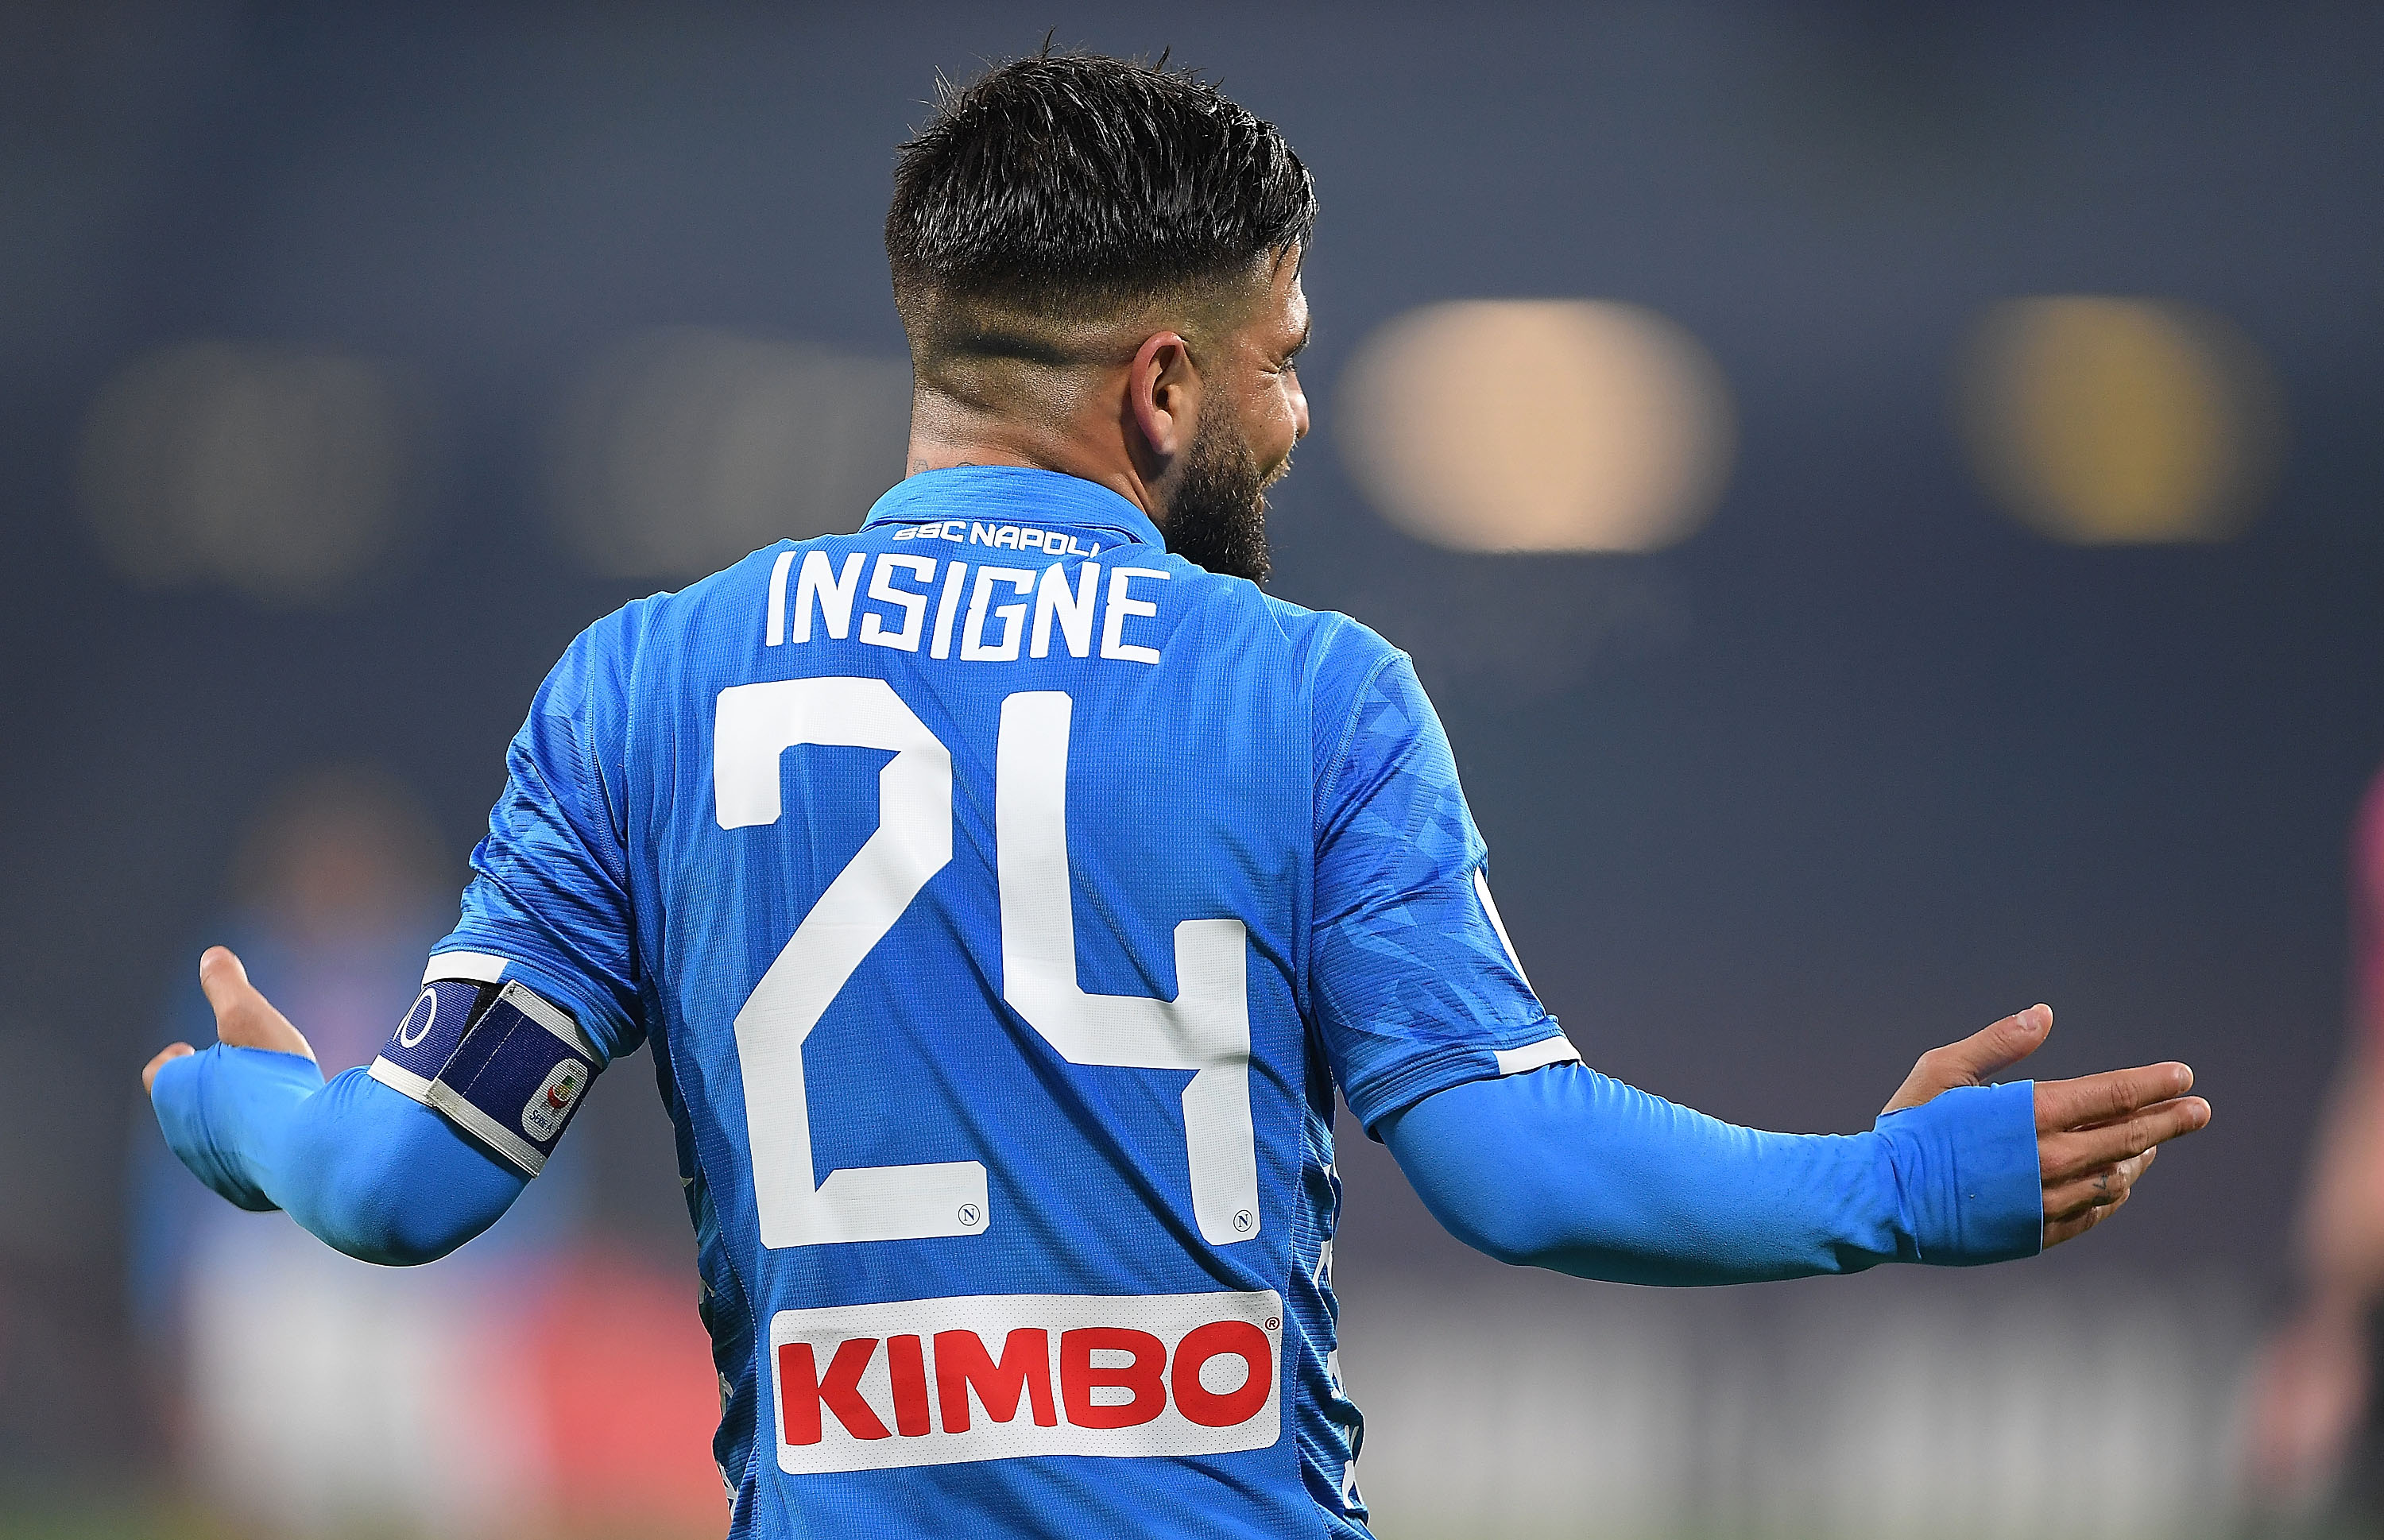 NAPLES, ITALY - JANUARY 13:  Lorenzo Insigne of SSC Napoli in action during the Coppa Italia match between SSC Napoli and US Sassuolo at Stadio San Paolo on January 13, 2019 in Naples, Italy.  (Photo by Francesco Pecoraro/Getty Images)